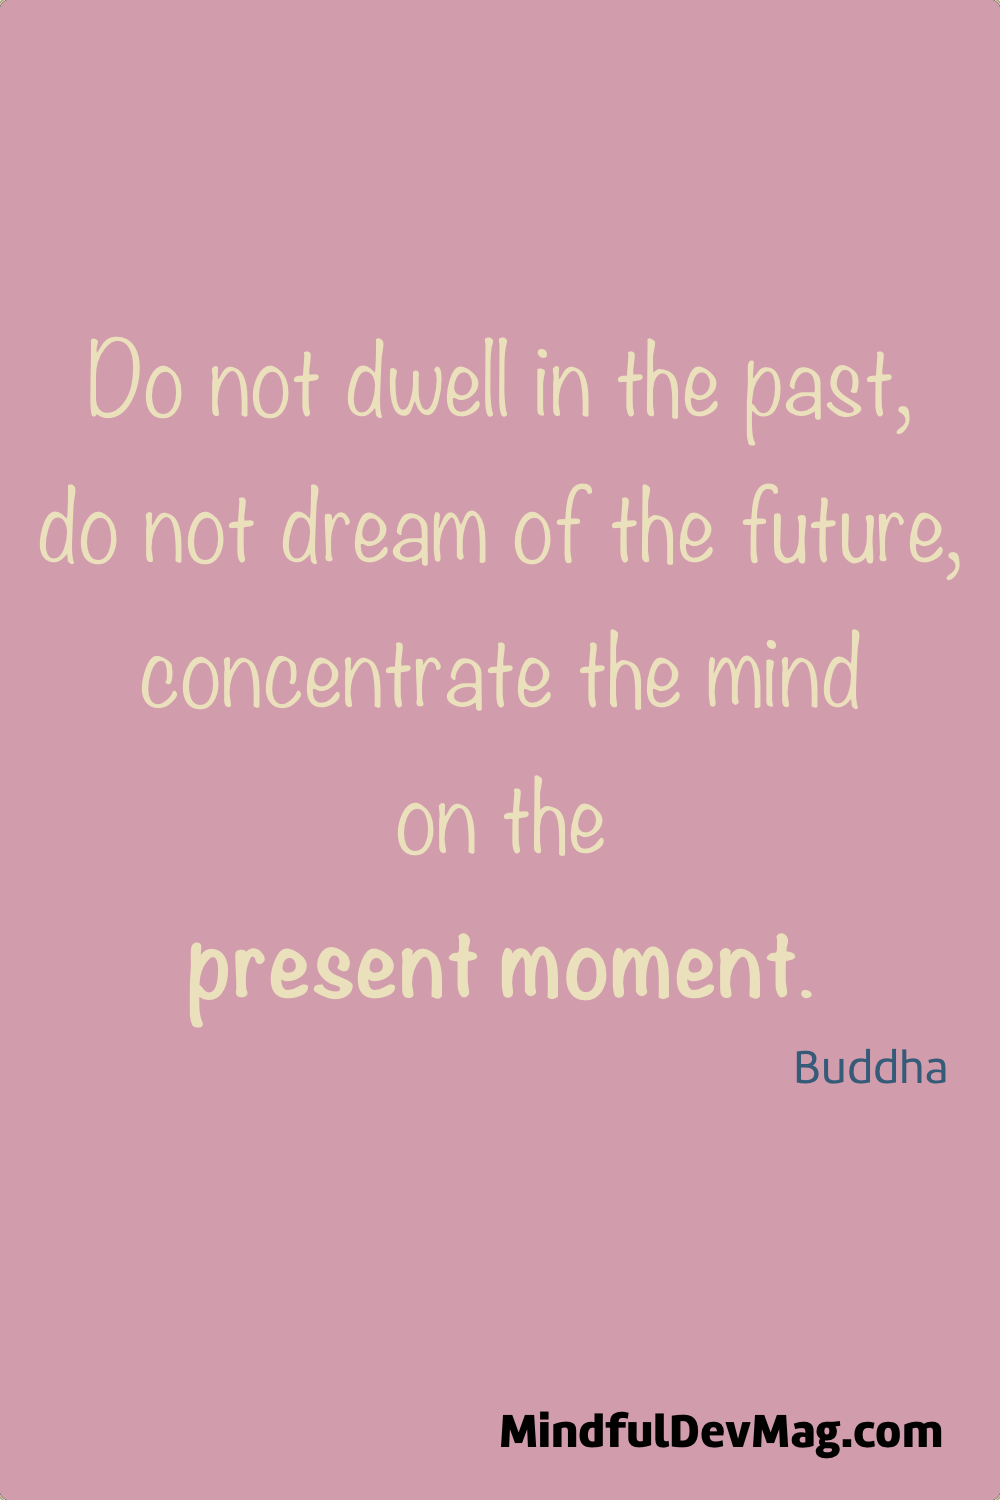 Mindful quote: Do not dwell in the past, do not dream of the future, concentrate the mind on the present moment. - Buddha